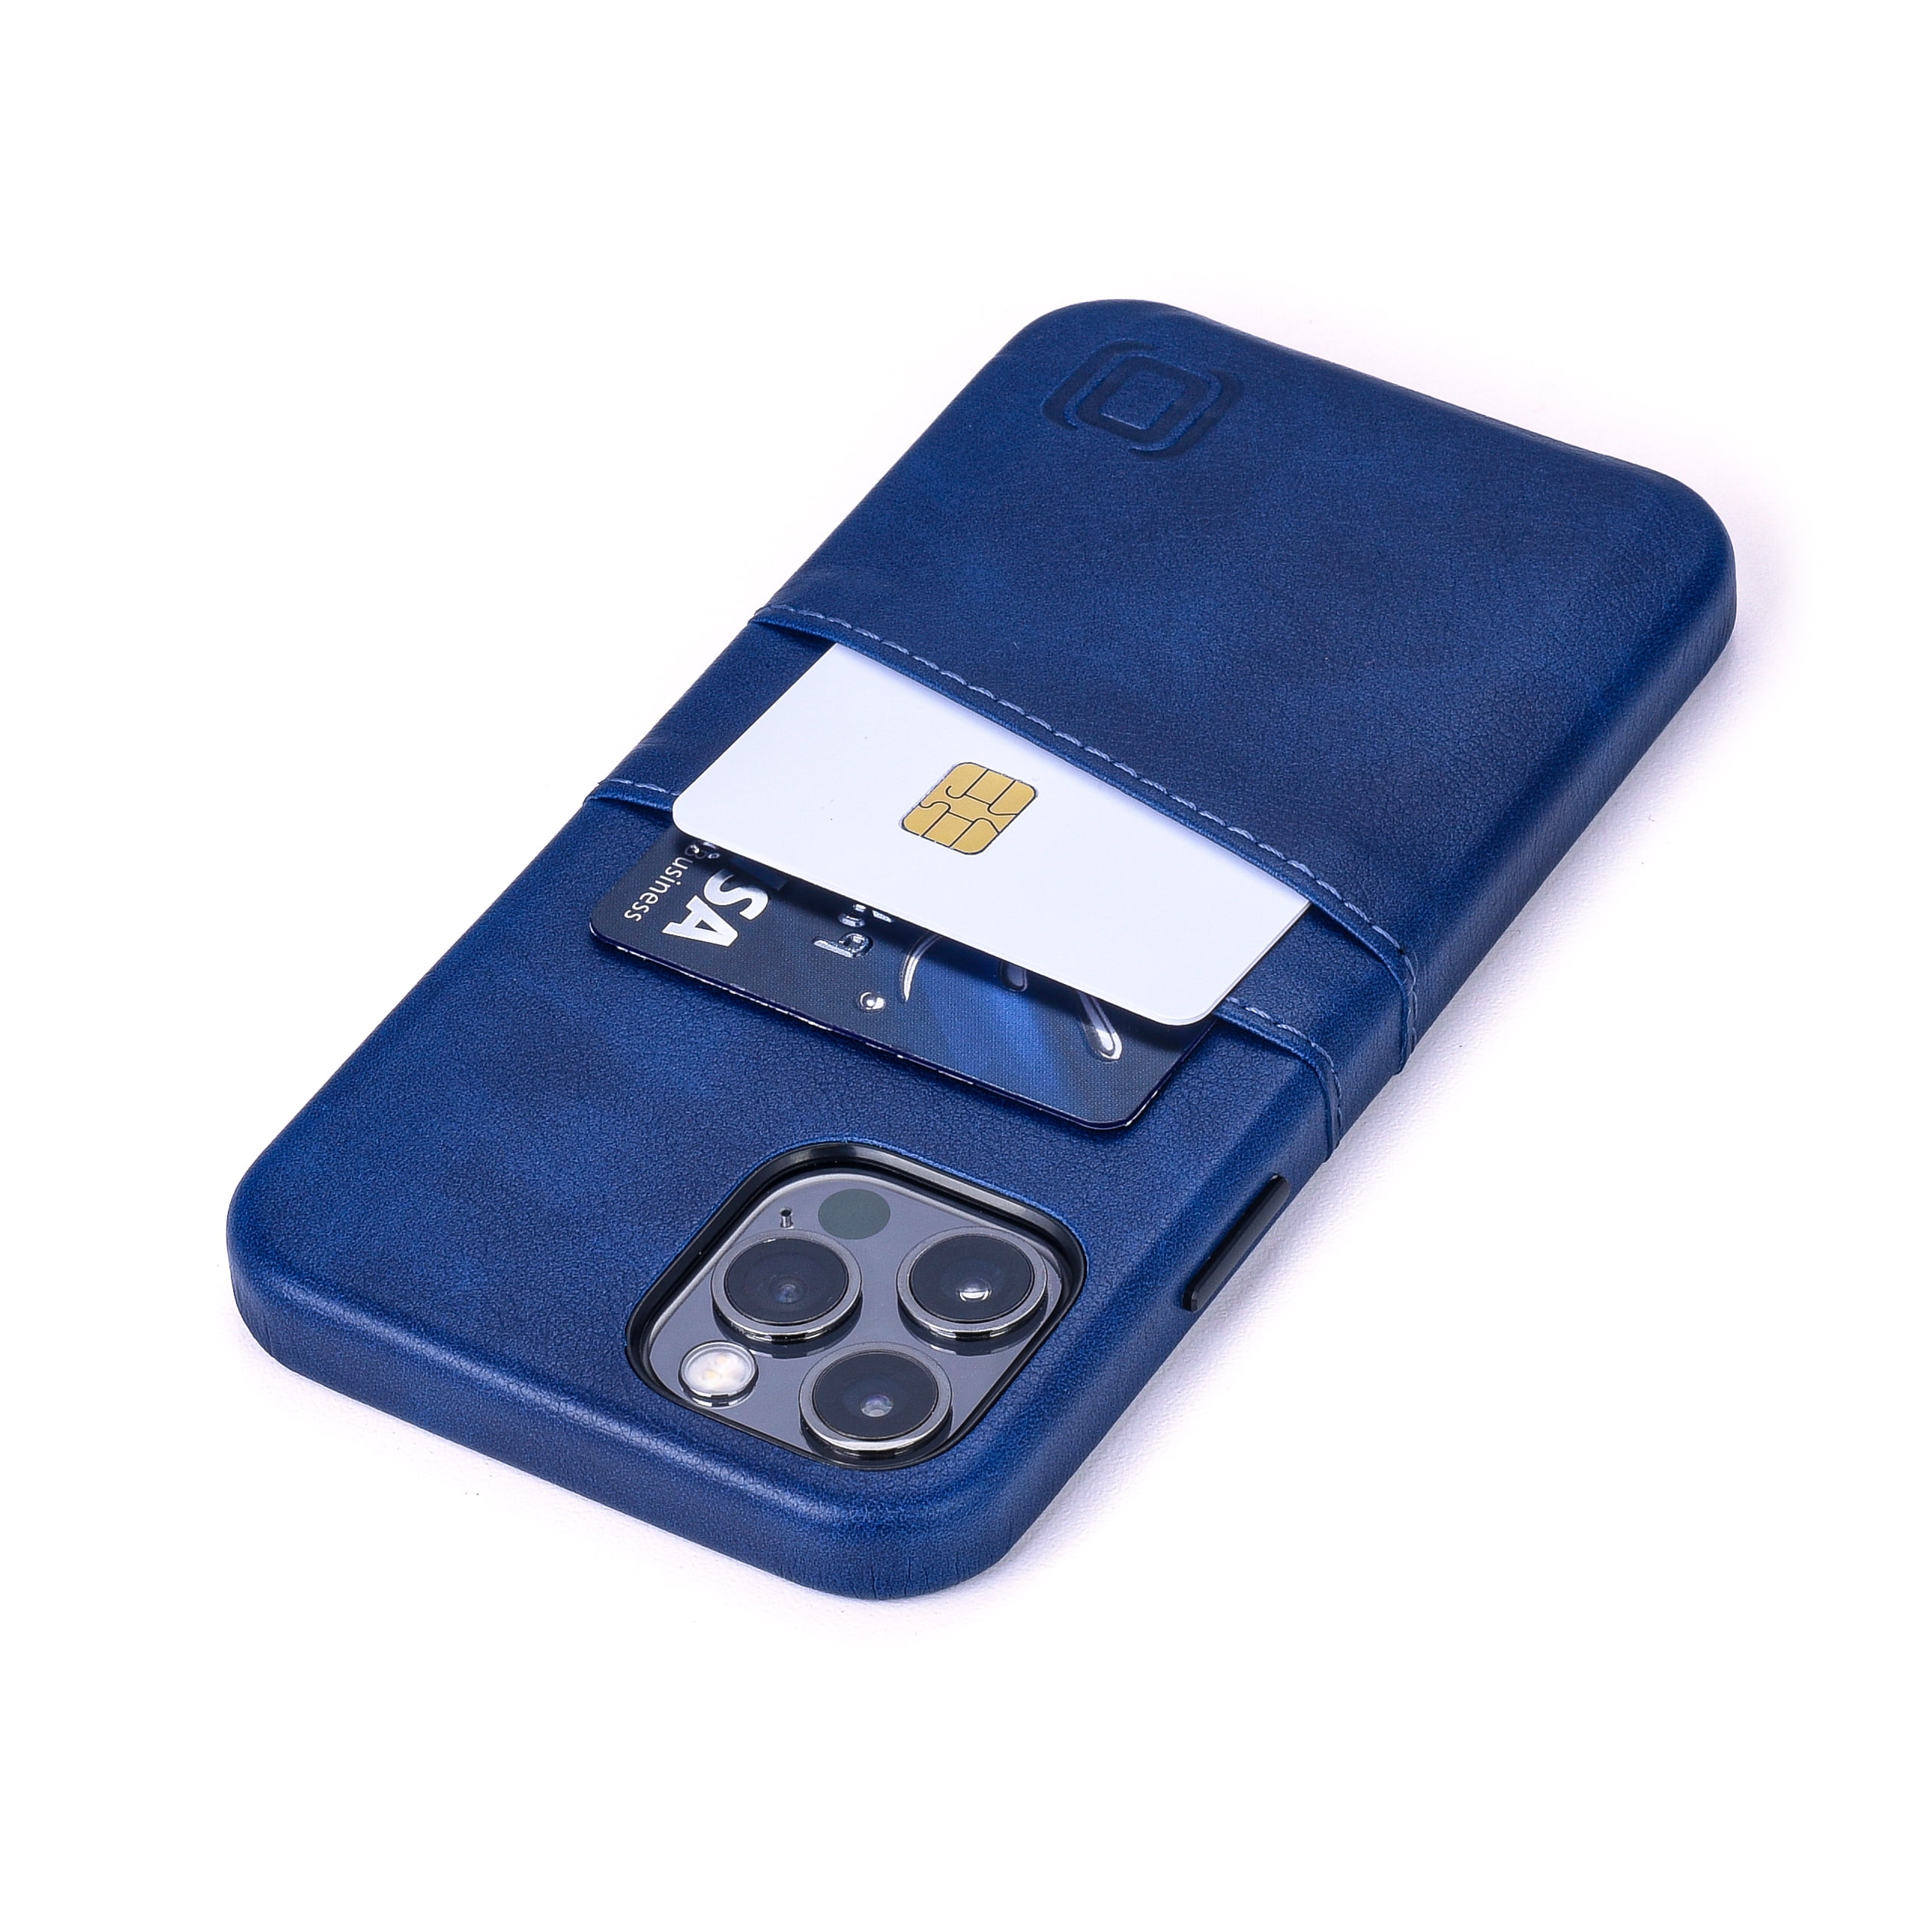 Navy Blue 6.7 Exec M2 Dockem Wallet Case for iPhone 12 Pro Max Smooth Synthetic Leather Built-in Metal Plate for Magnetic Mounting & 2 Credit Card Holders 